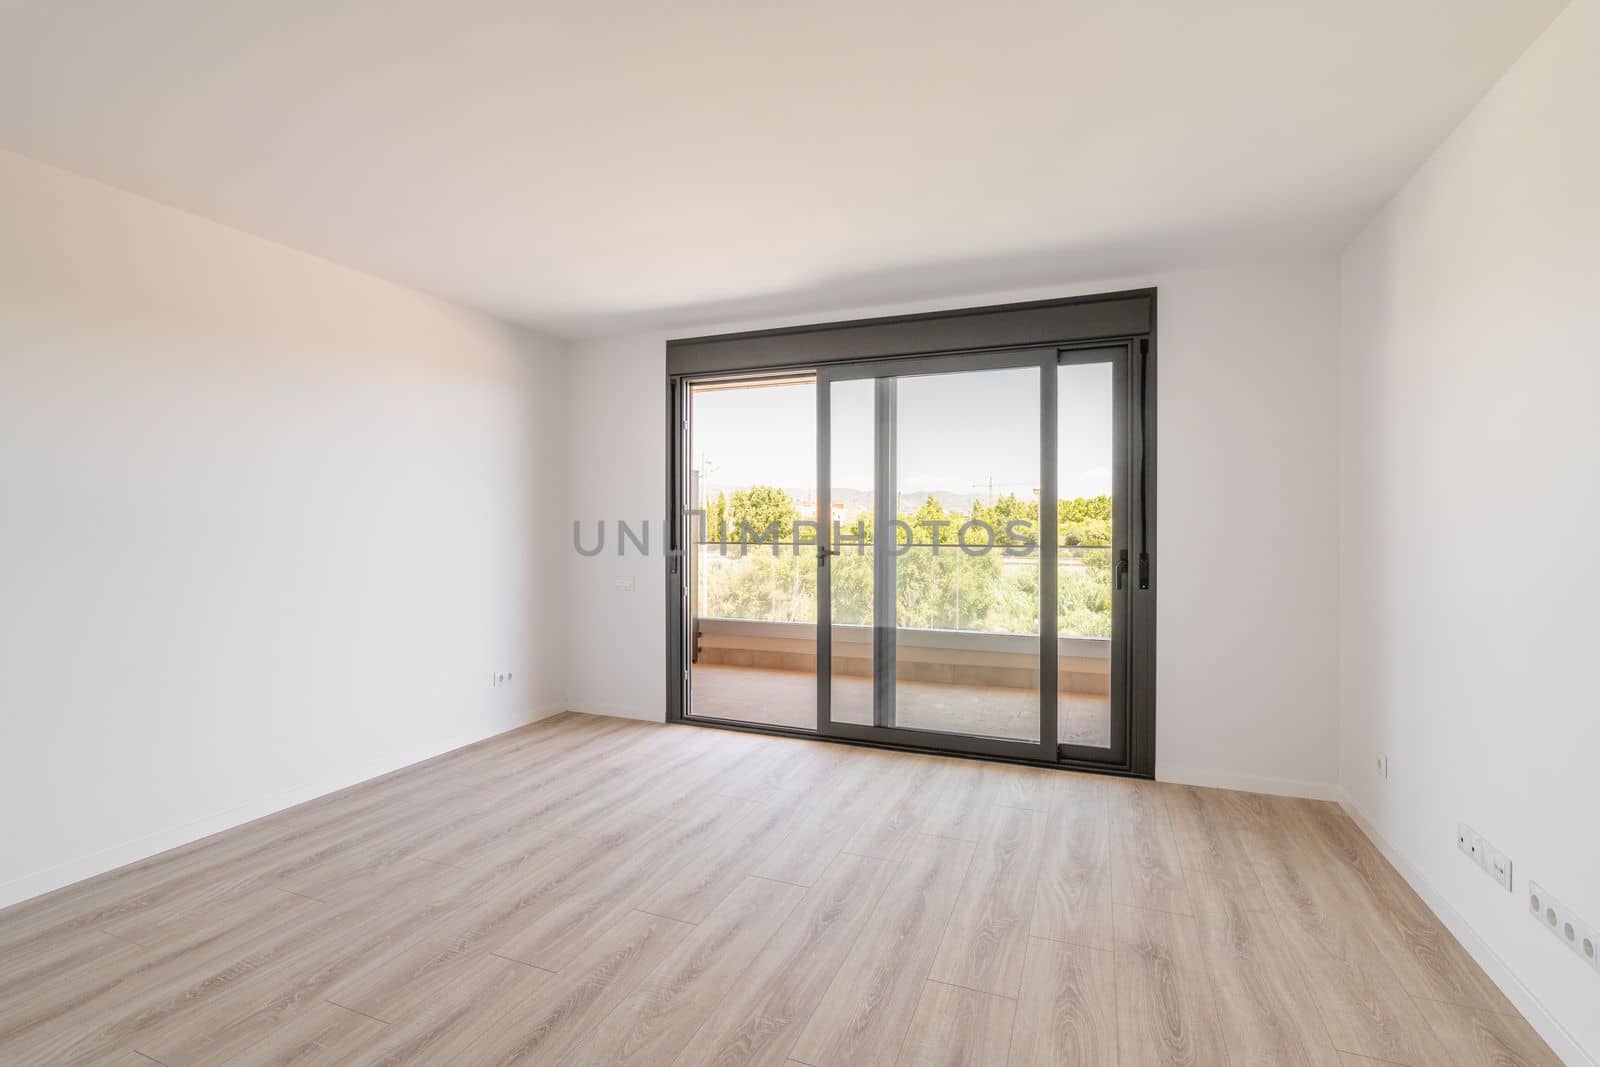 Spacious large room with wooden parquet structure and panoramic window overlooking beautiful landscape among complex of new buildings and balcony with elegant glass border. Mortgage and moving concept by apavlin